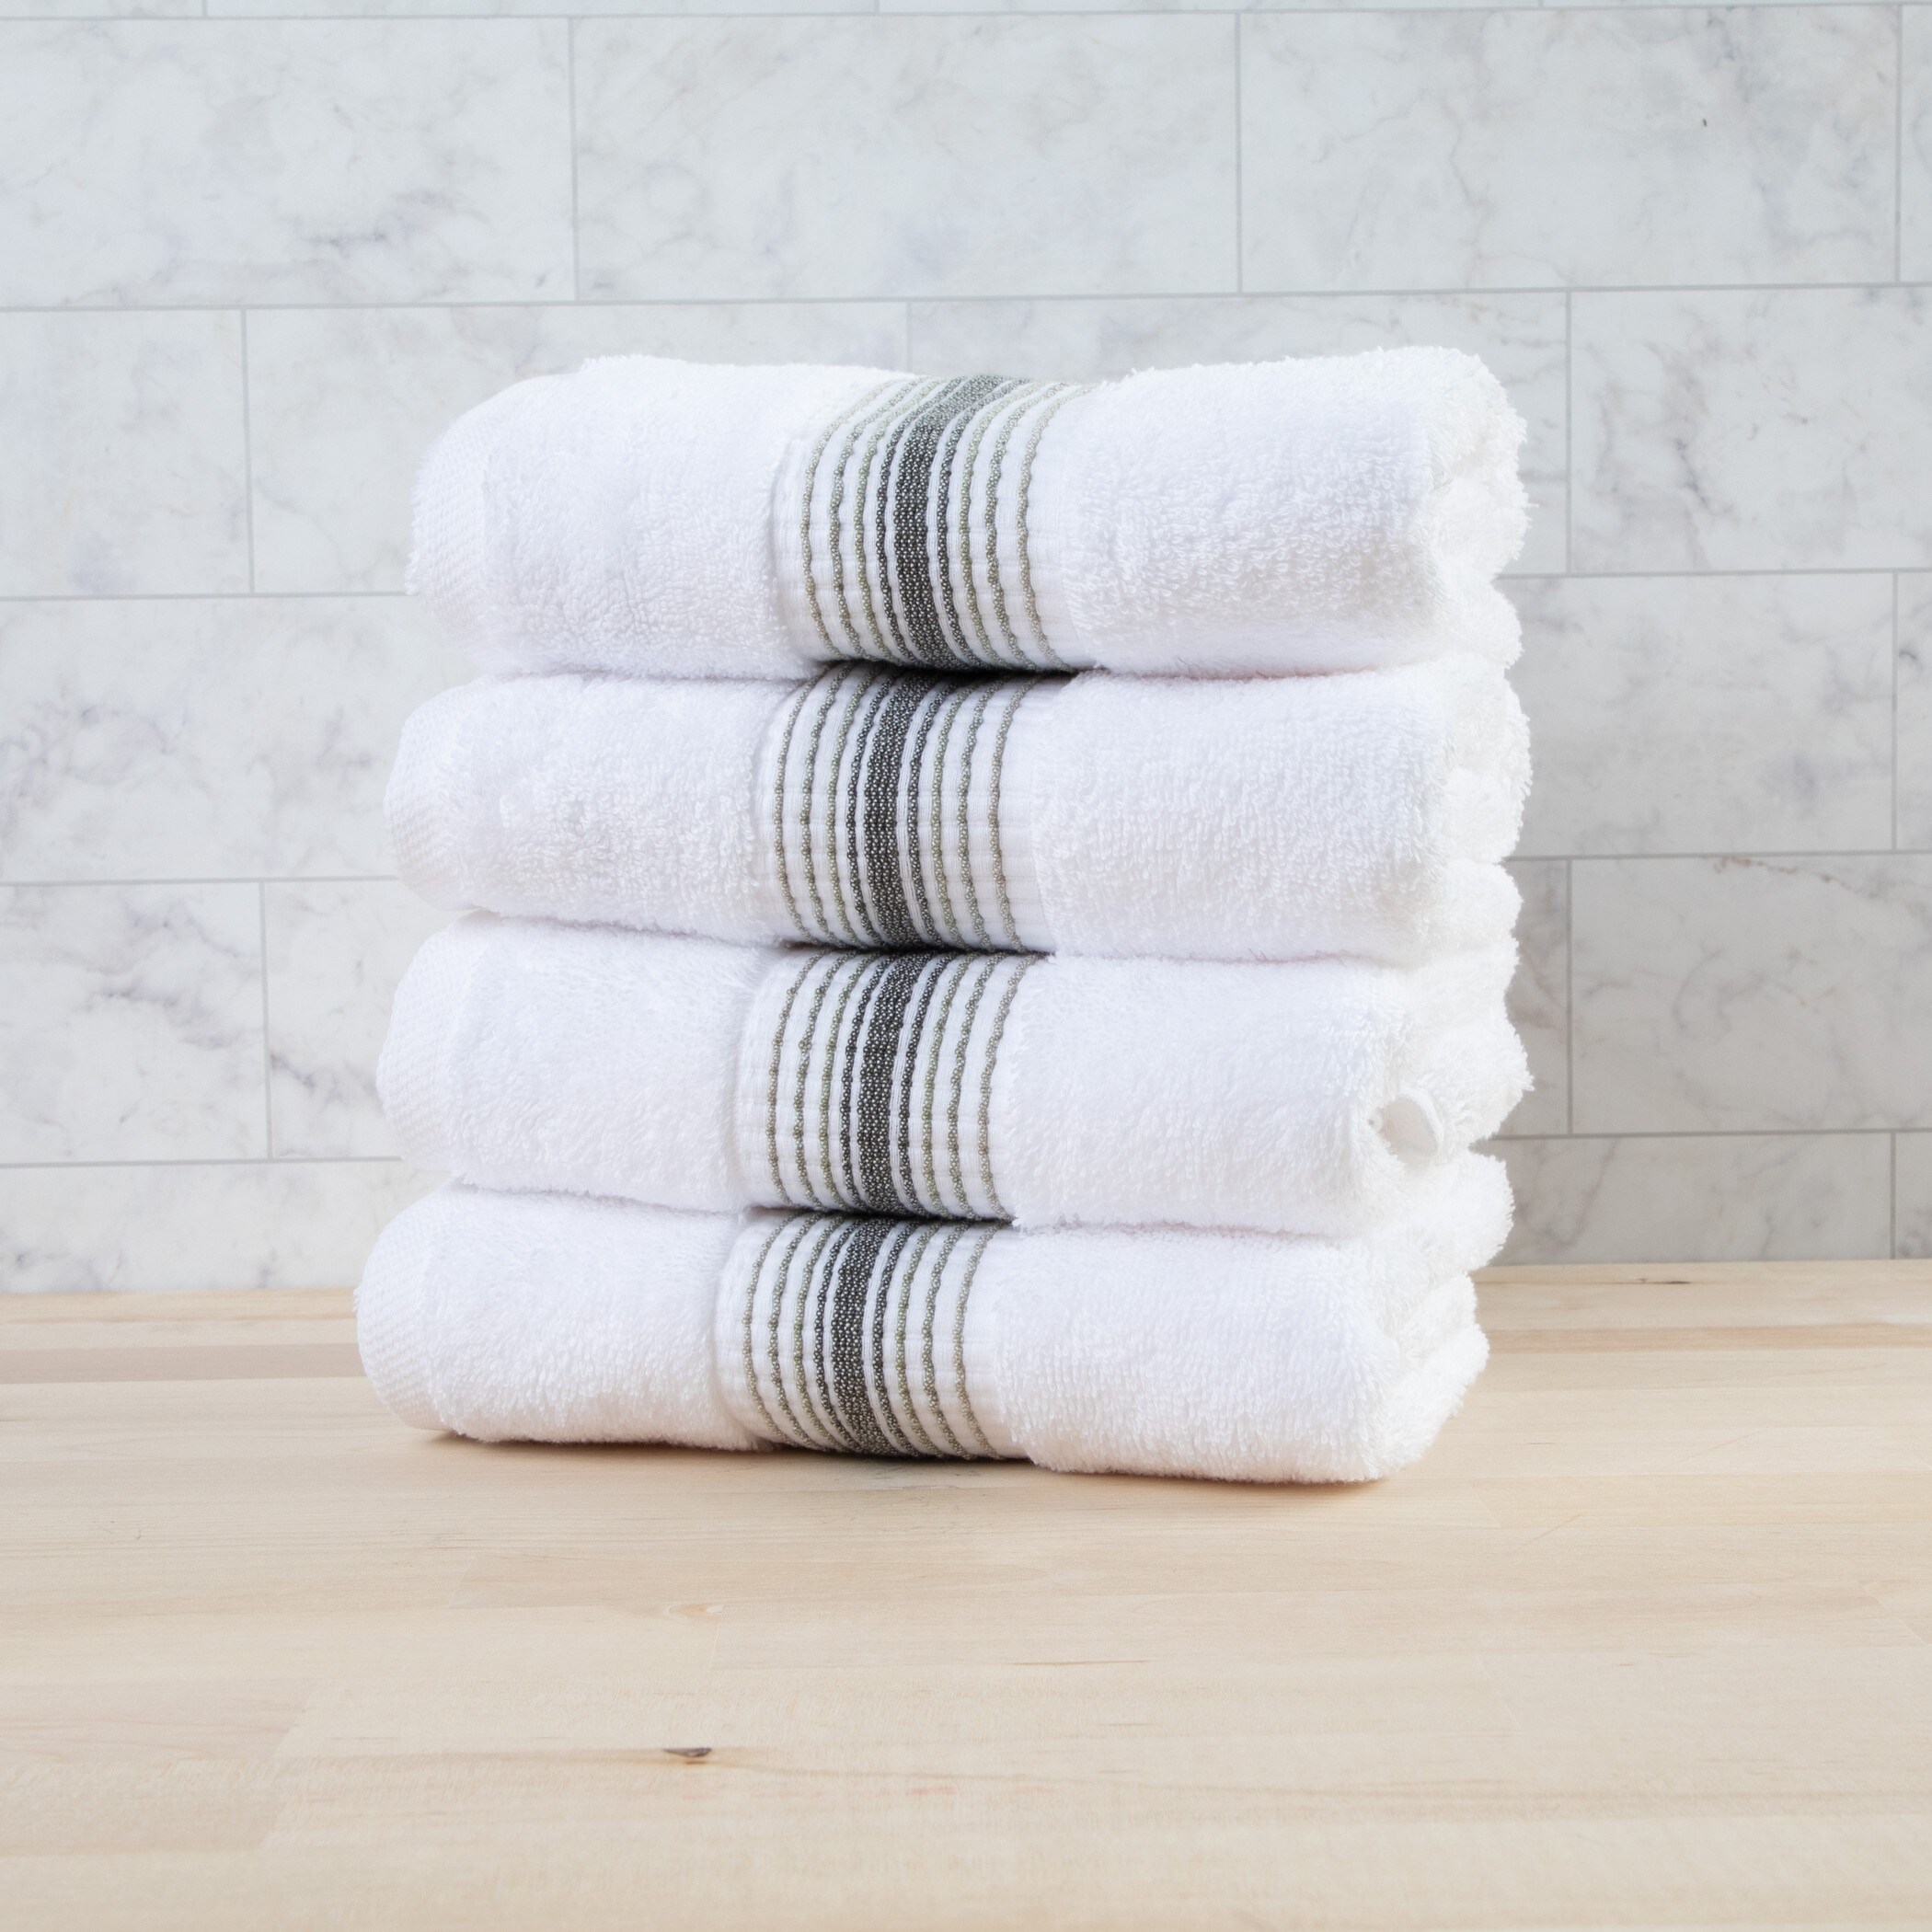 8 pc Hotel Collection DOTTED STRIPE SPA TOWEL ENSEMBLE Bath Hand